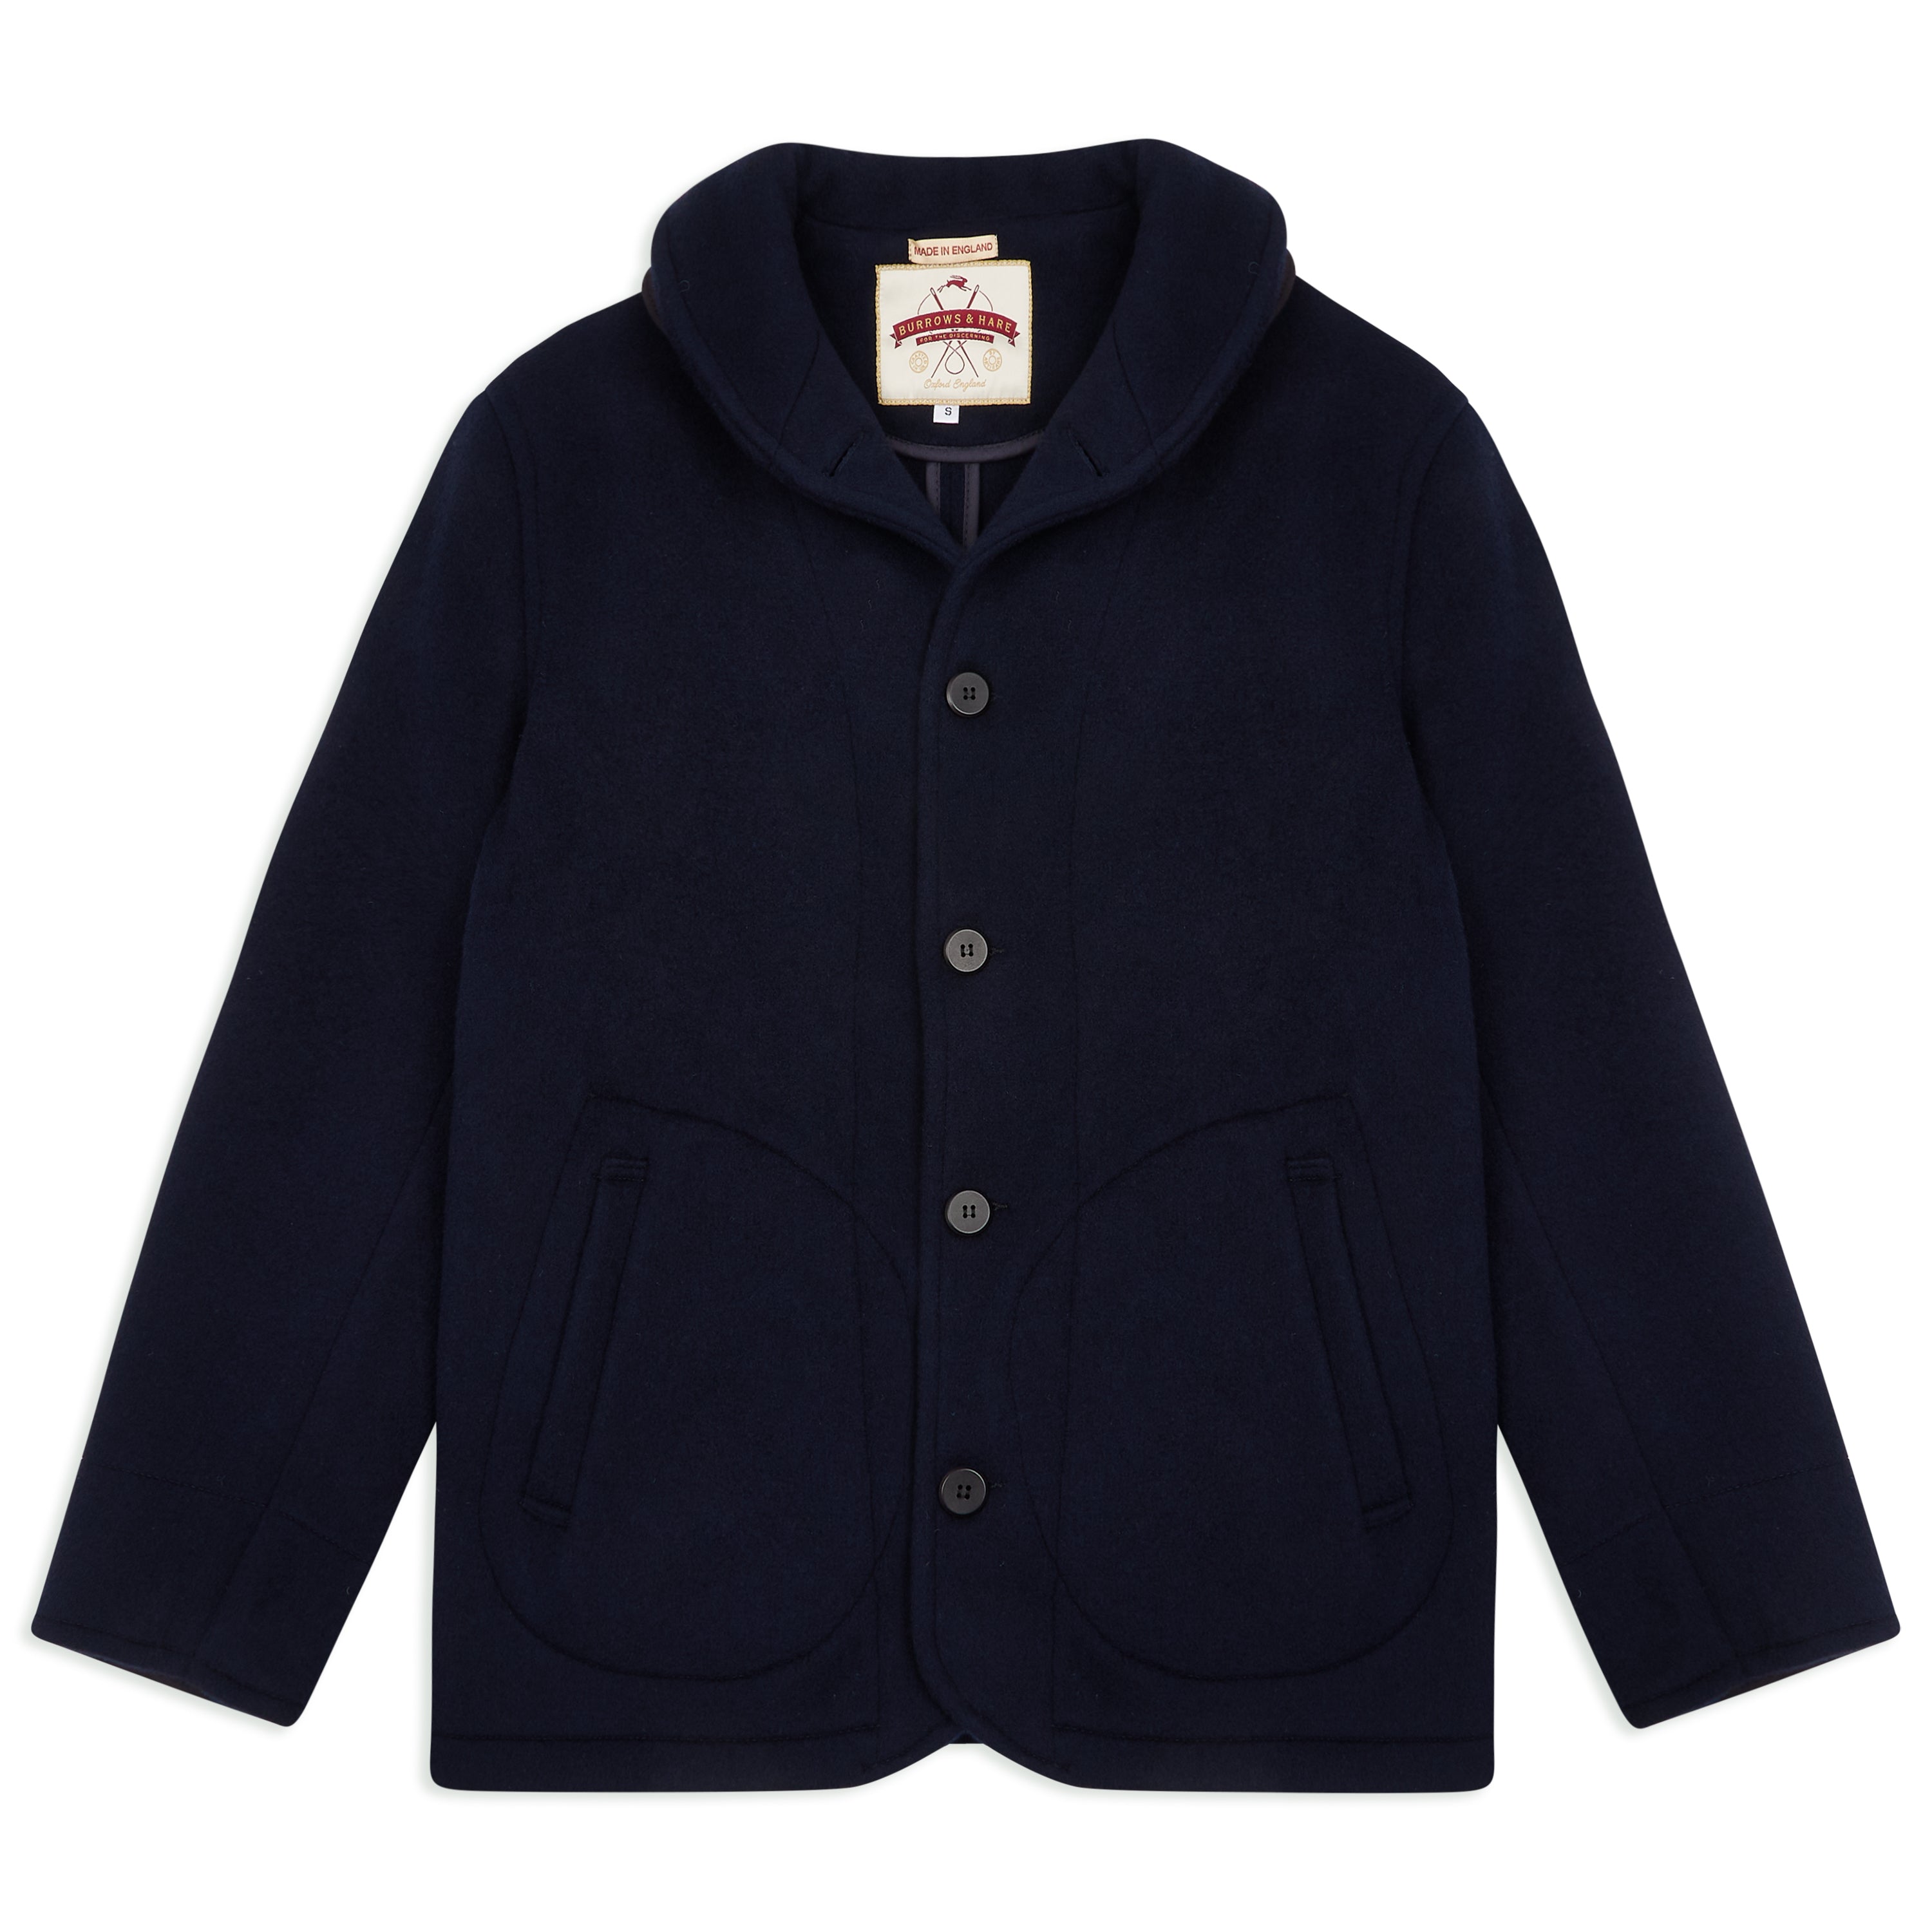 burrows-and-hare-lightweight-shawl-collar-jacket-navy